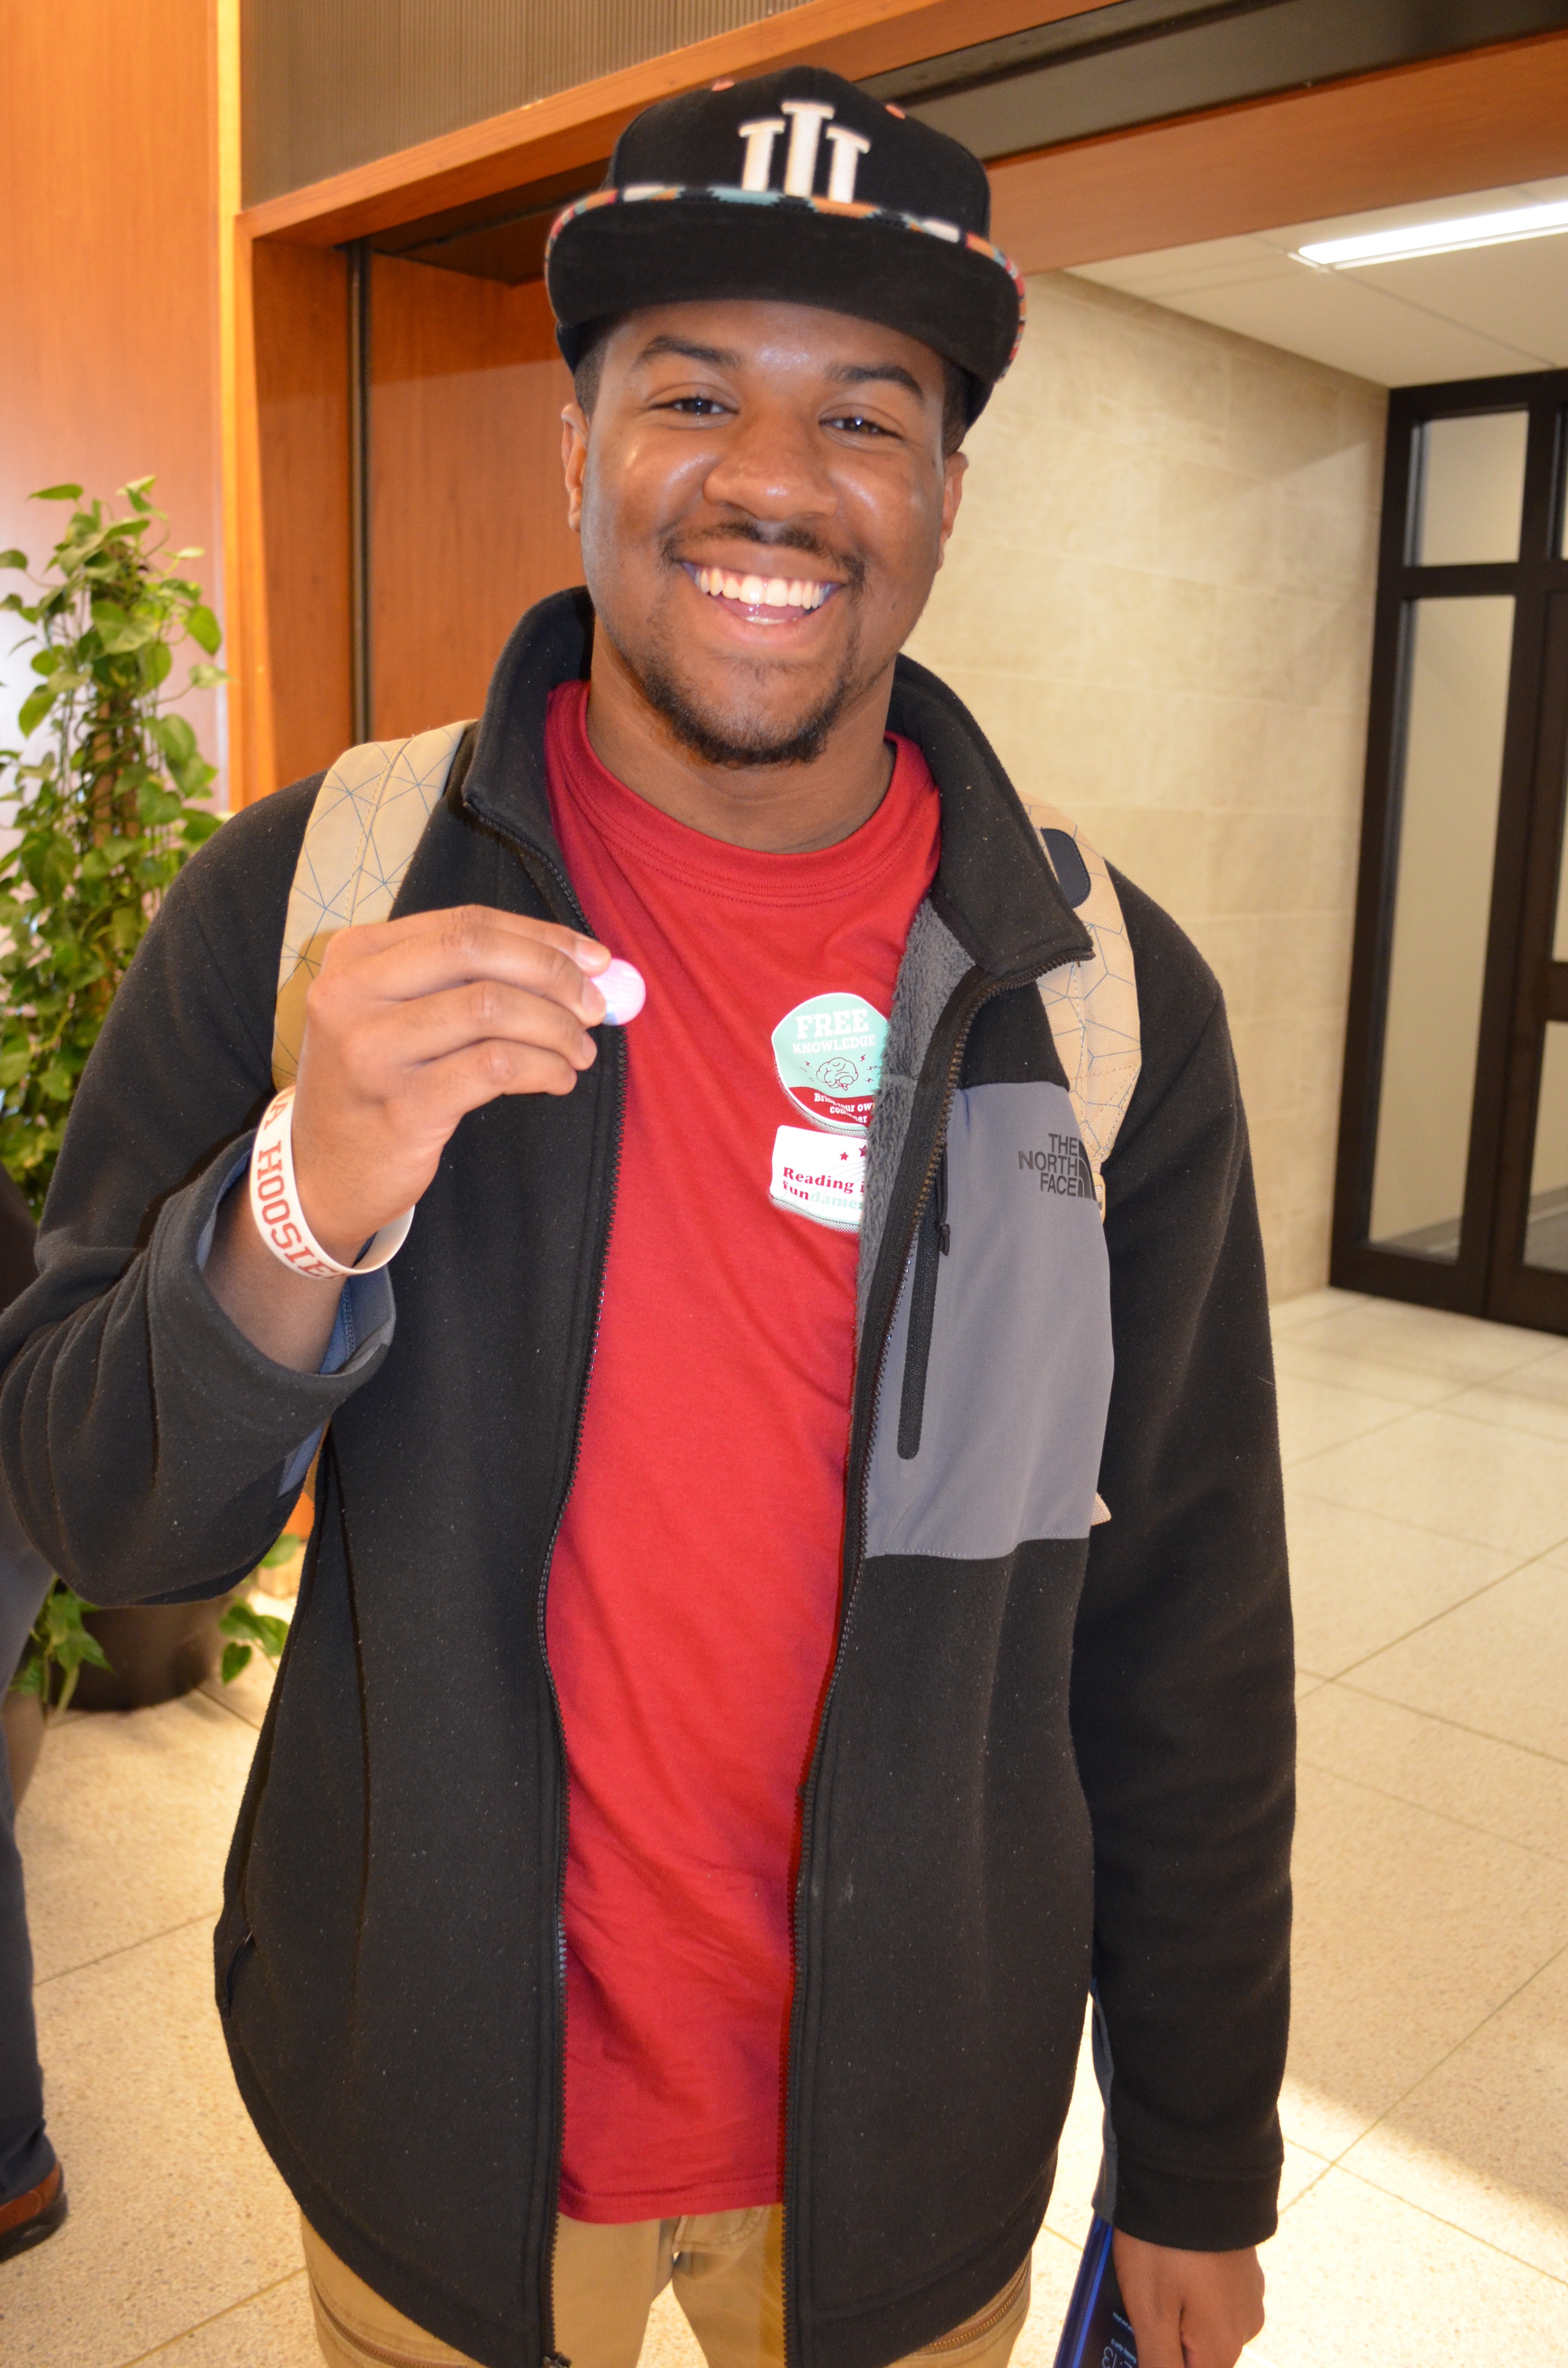 Student Justin Muse shows off his IU Day button